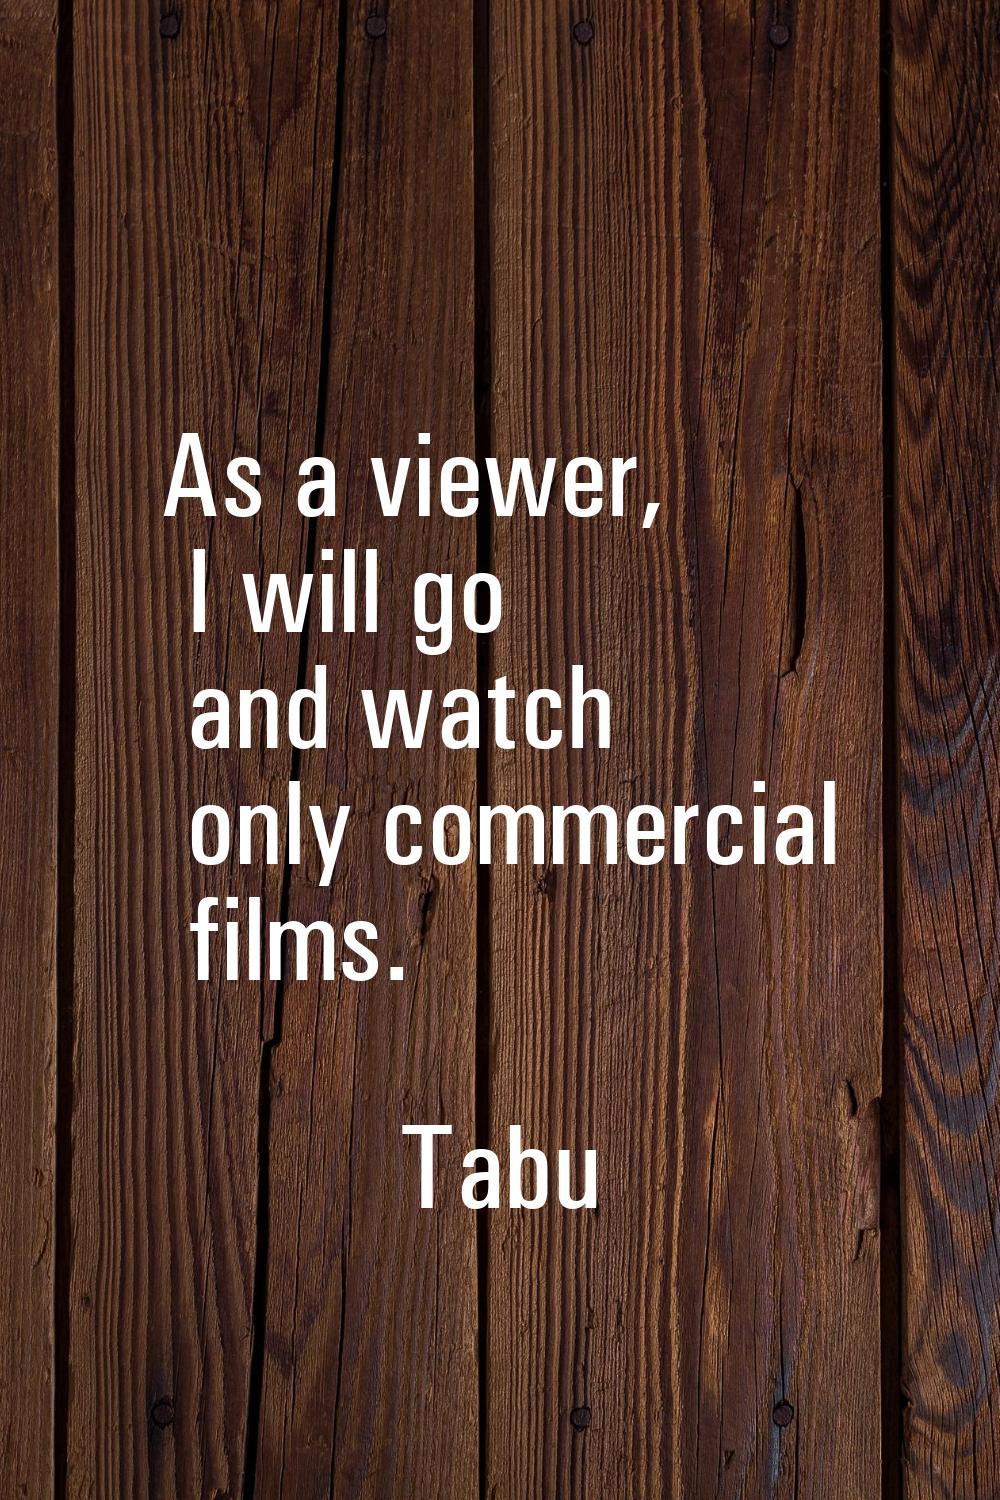 As a viewer, I will go and watch only commercial films.